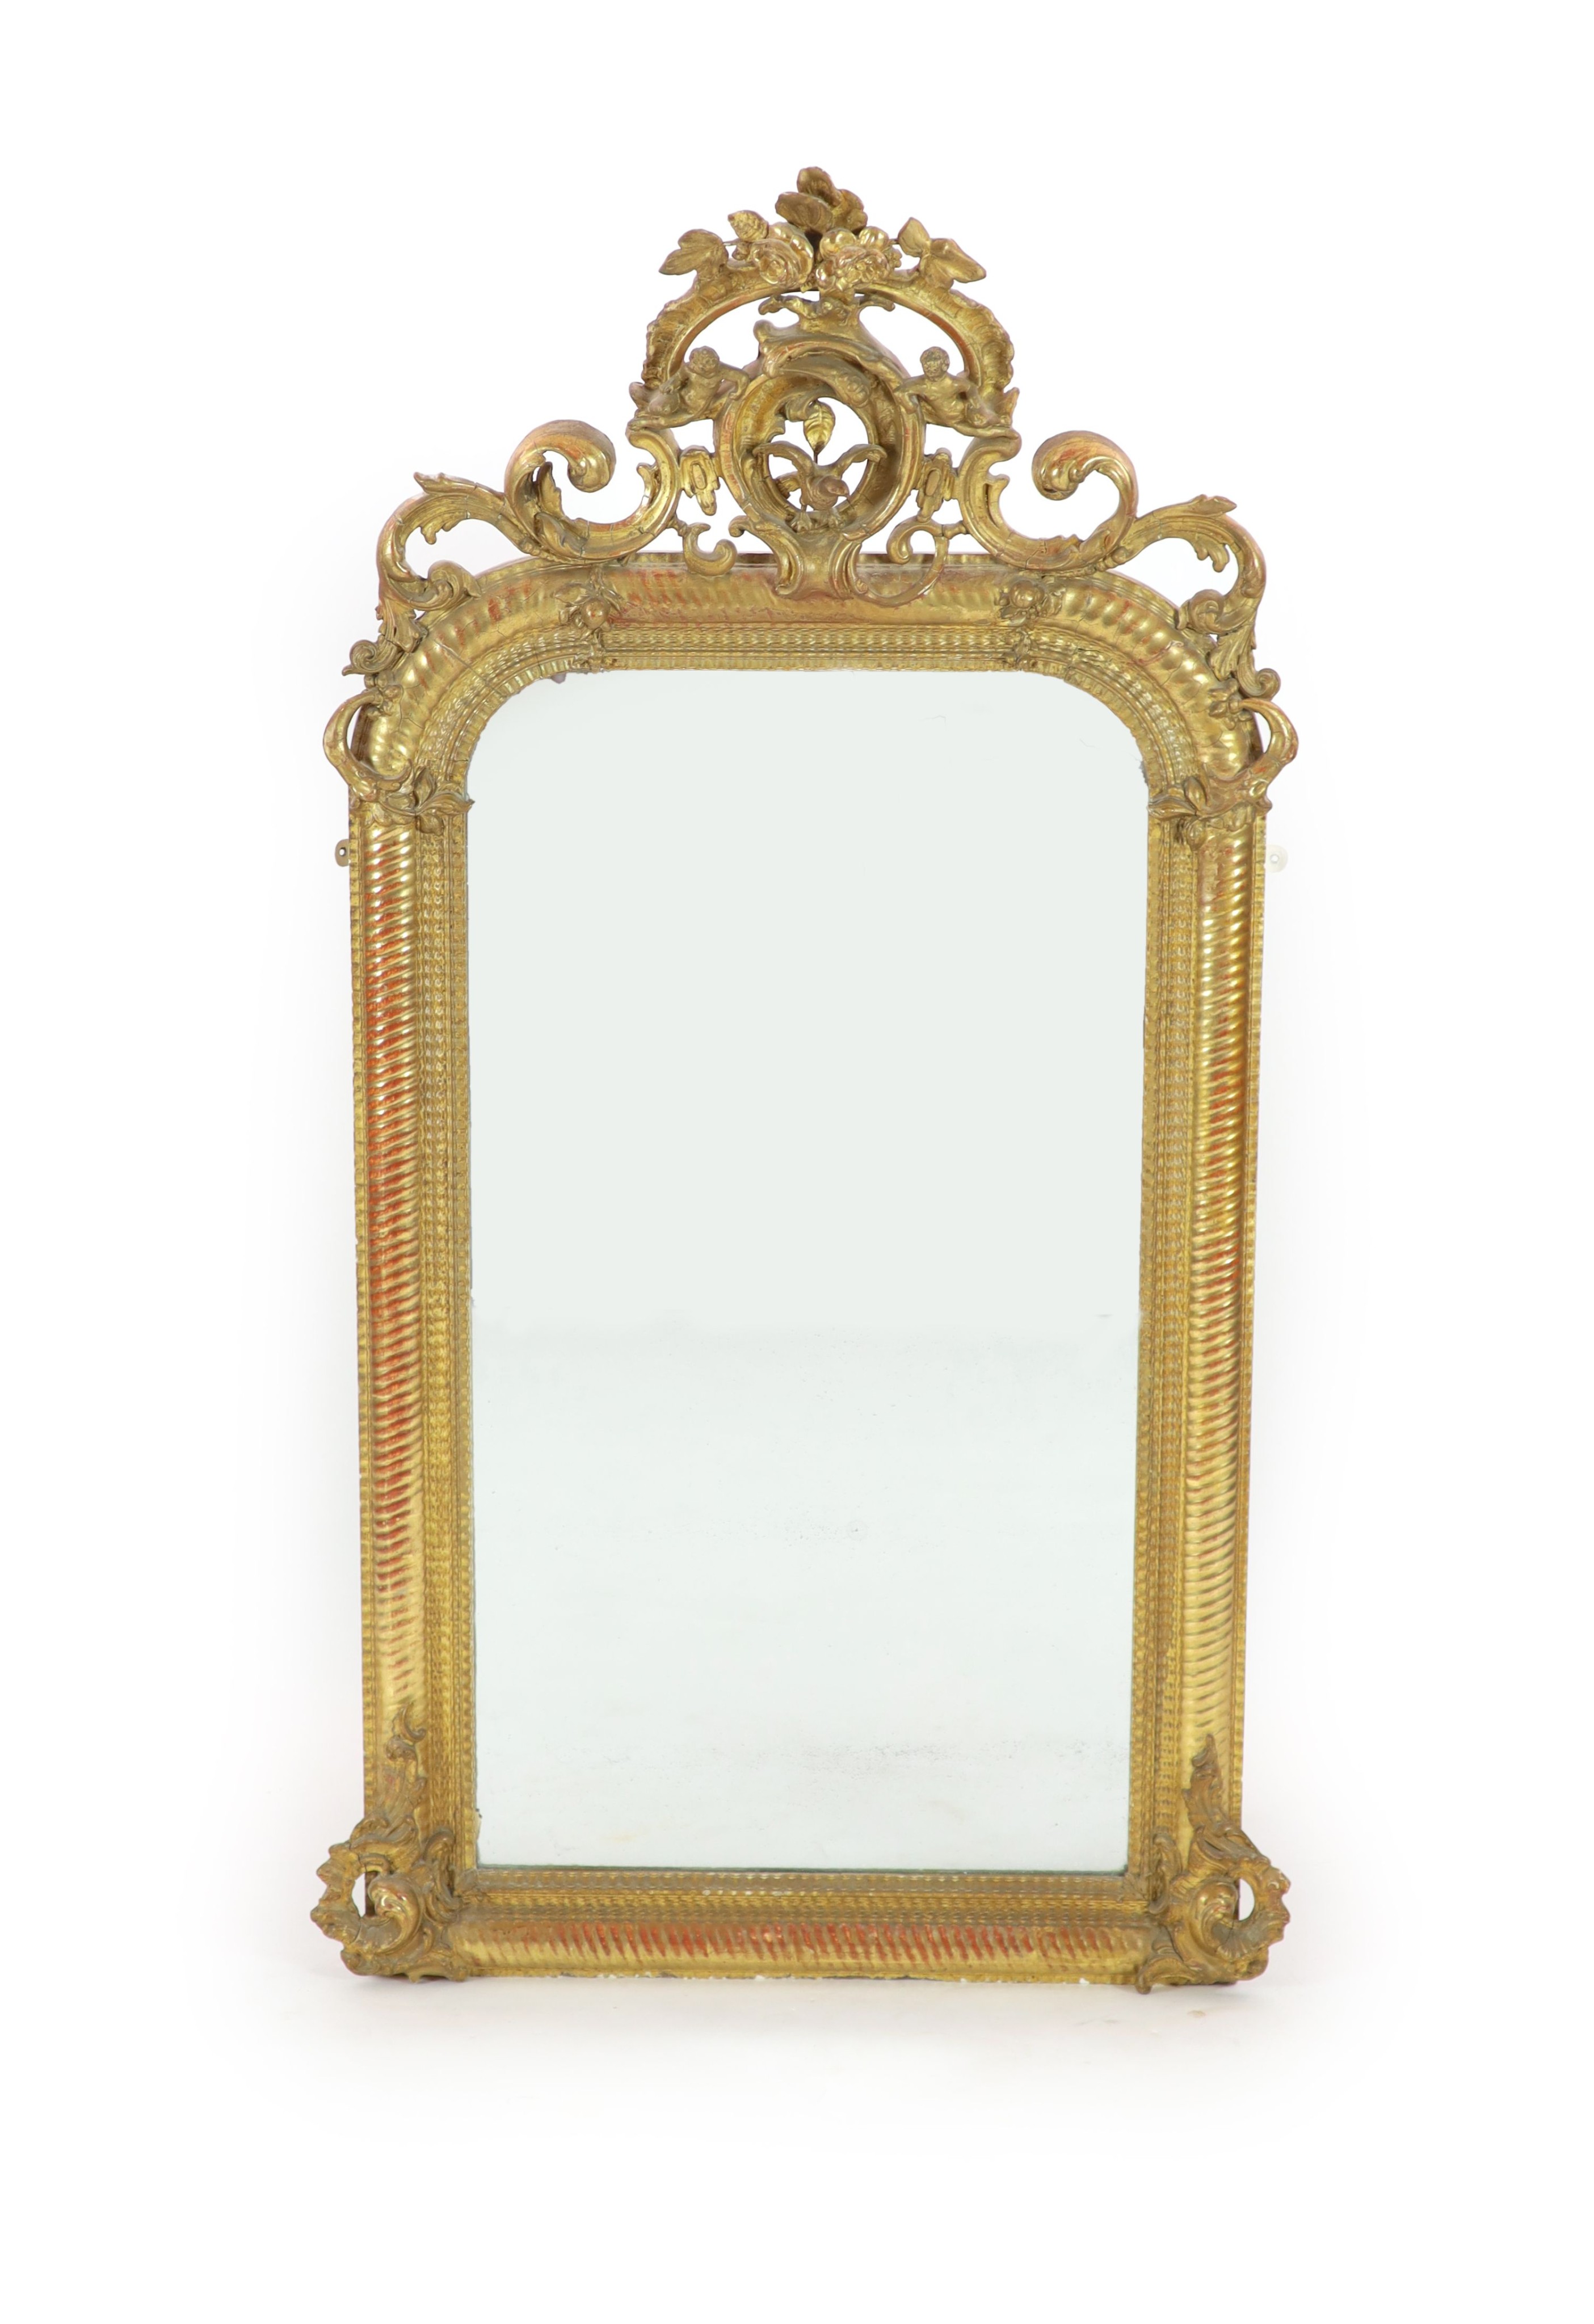 A 19th century French carved giltwood and gesso wall mirror H 175cm. W 97cm.